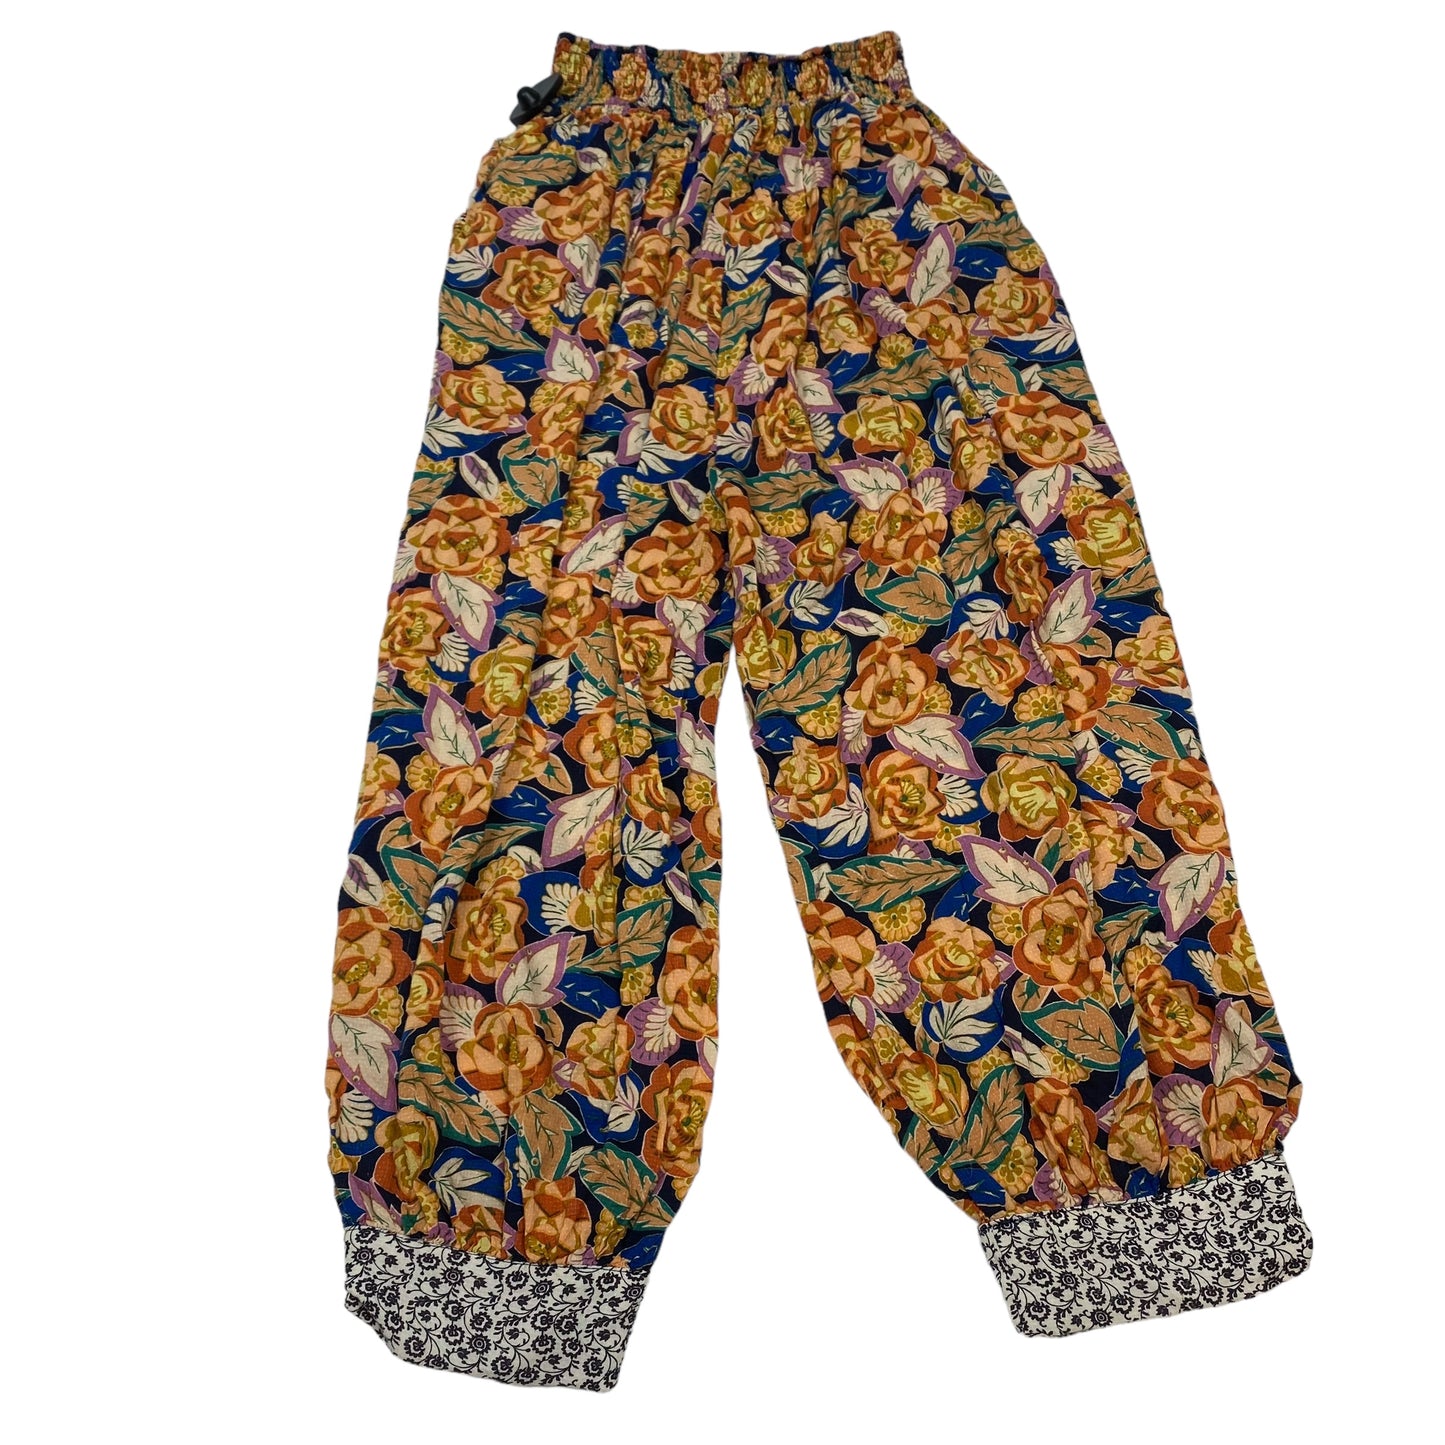 Multi-colored Pants Other Anthropologie, Size M